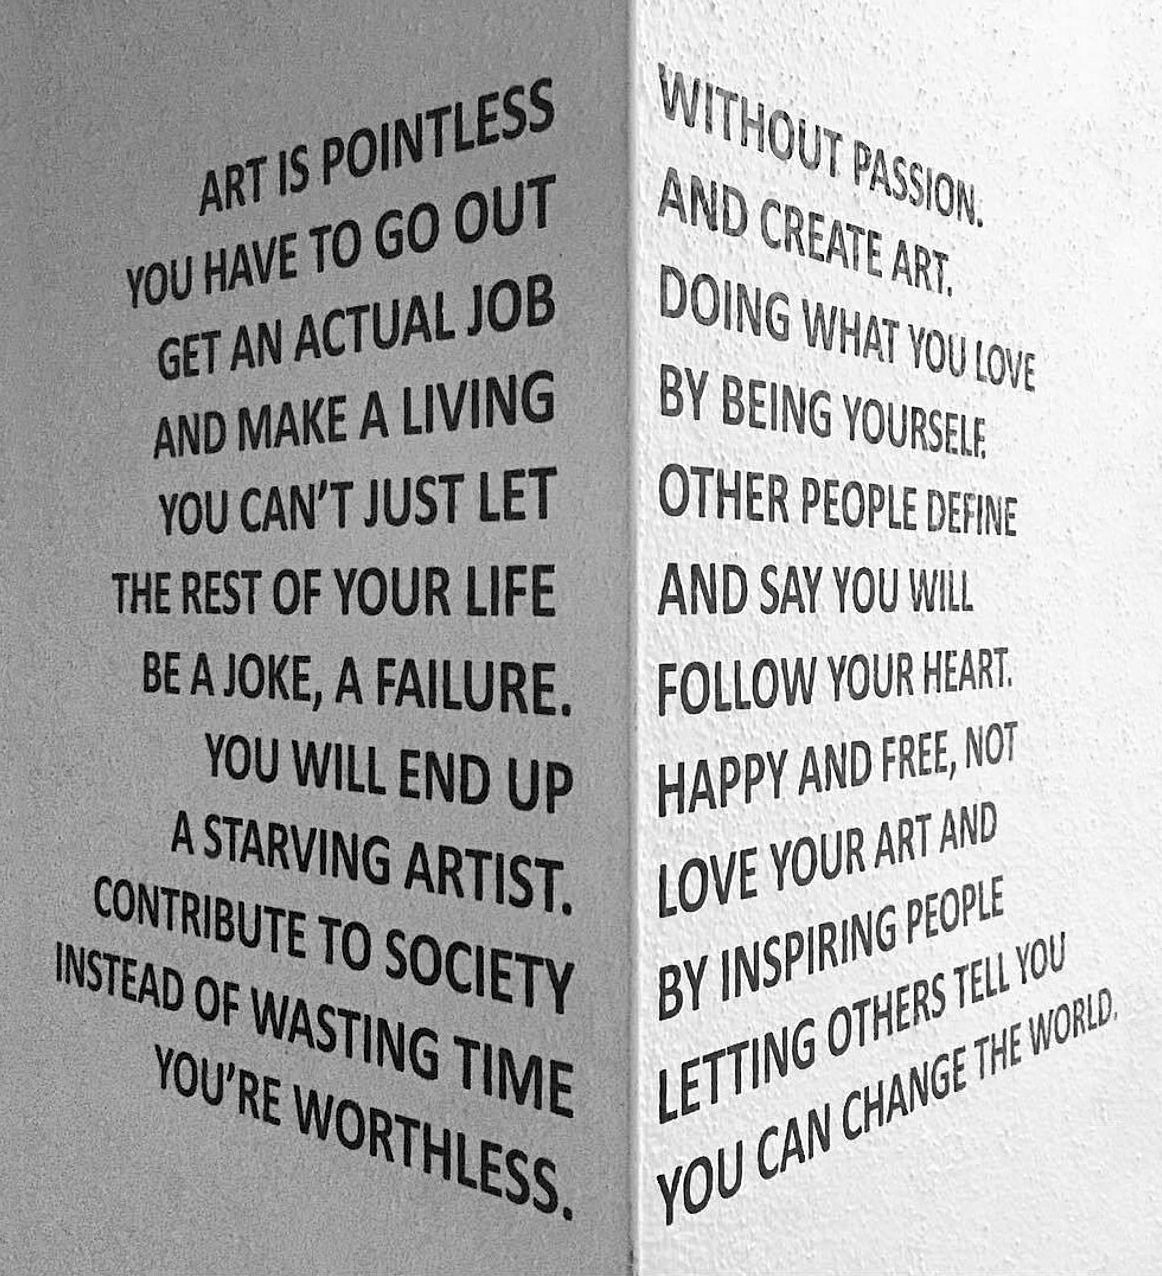 Art is Pointless without Passion, two sides to creating art. 